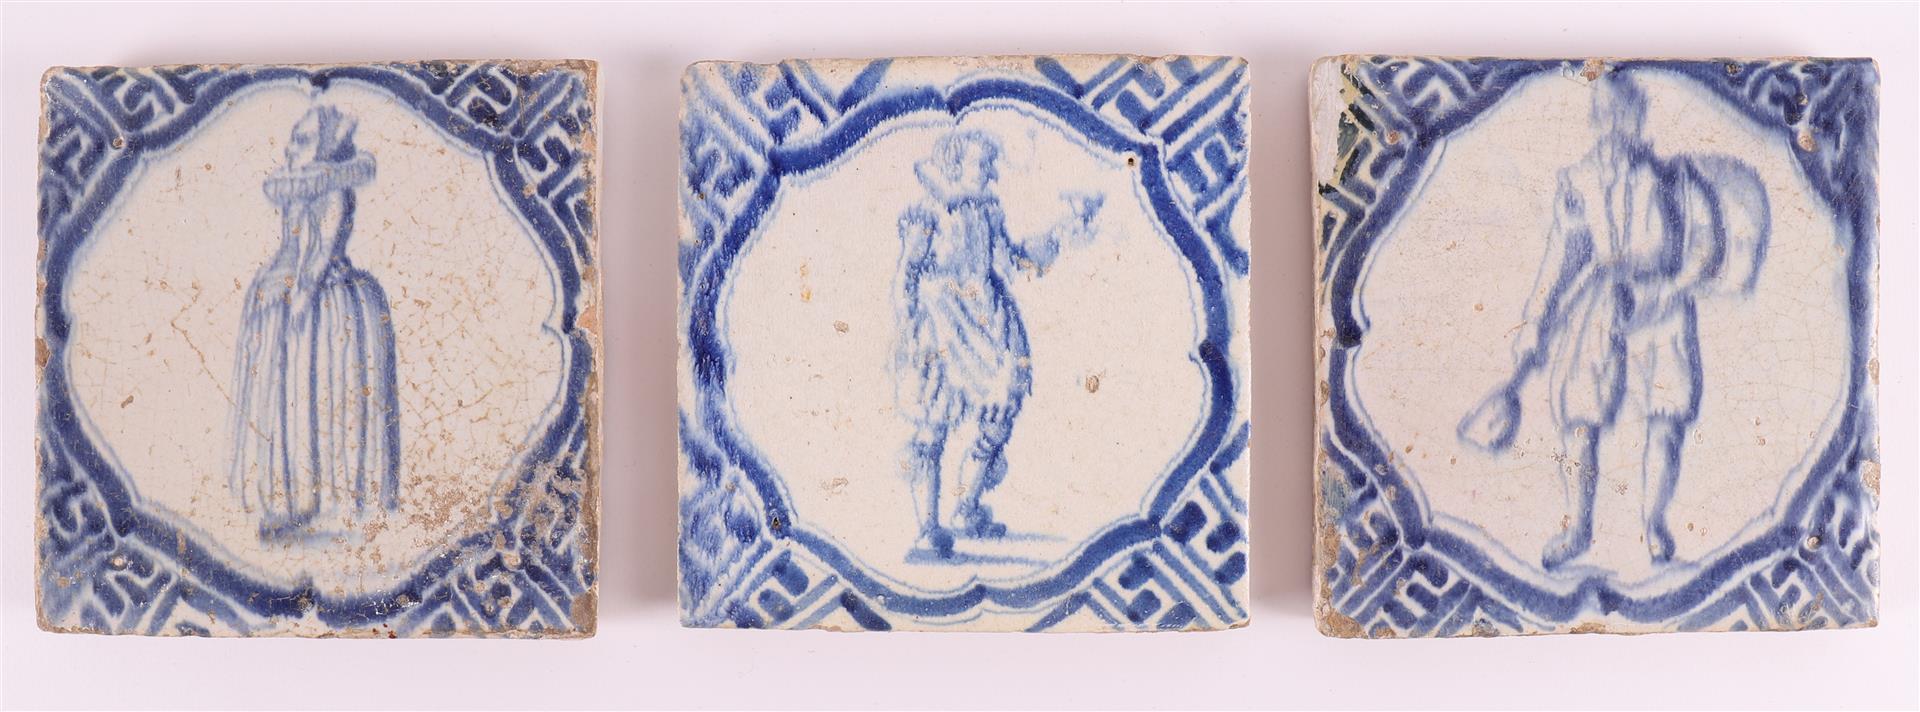 Three various blue/white tiles with, among other things, an image of a man with a bird and a woman